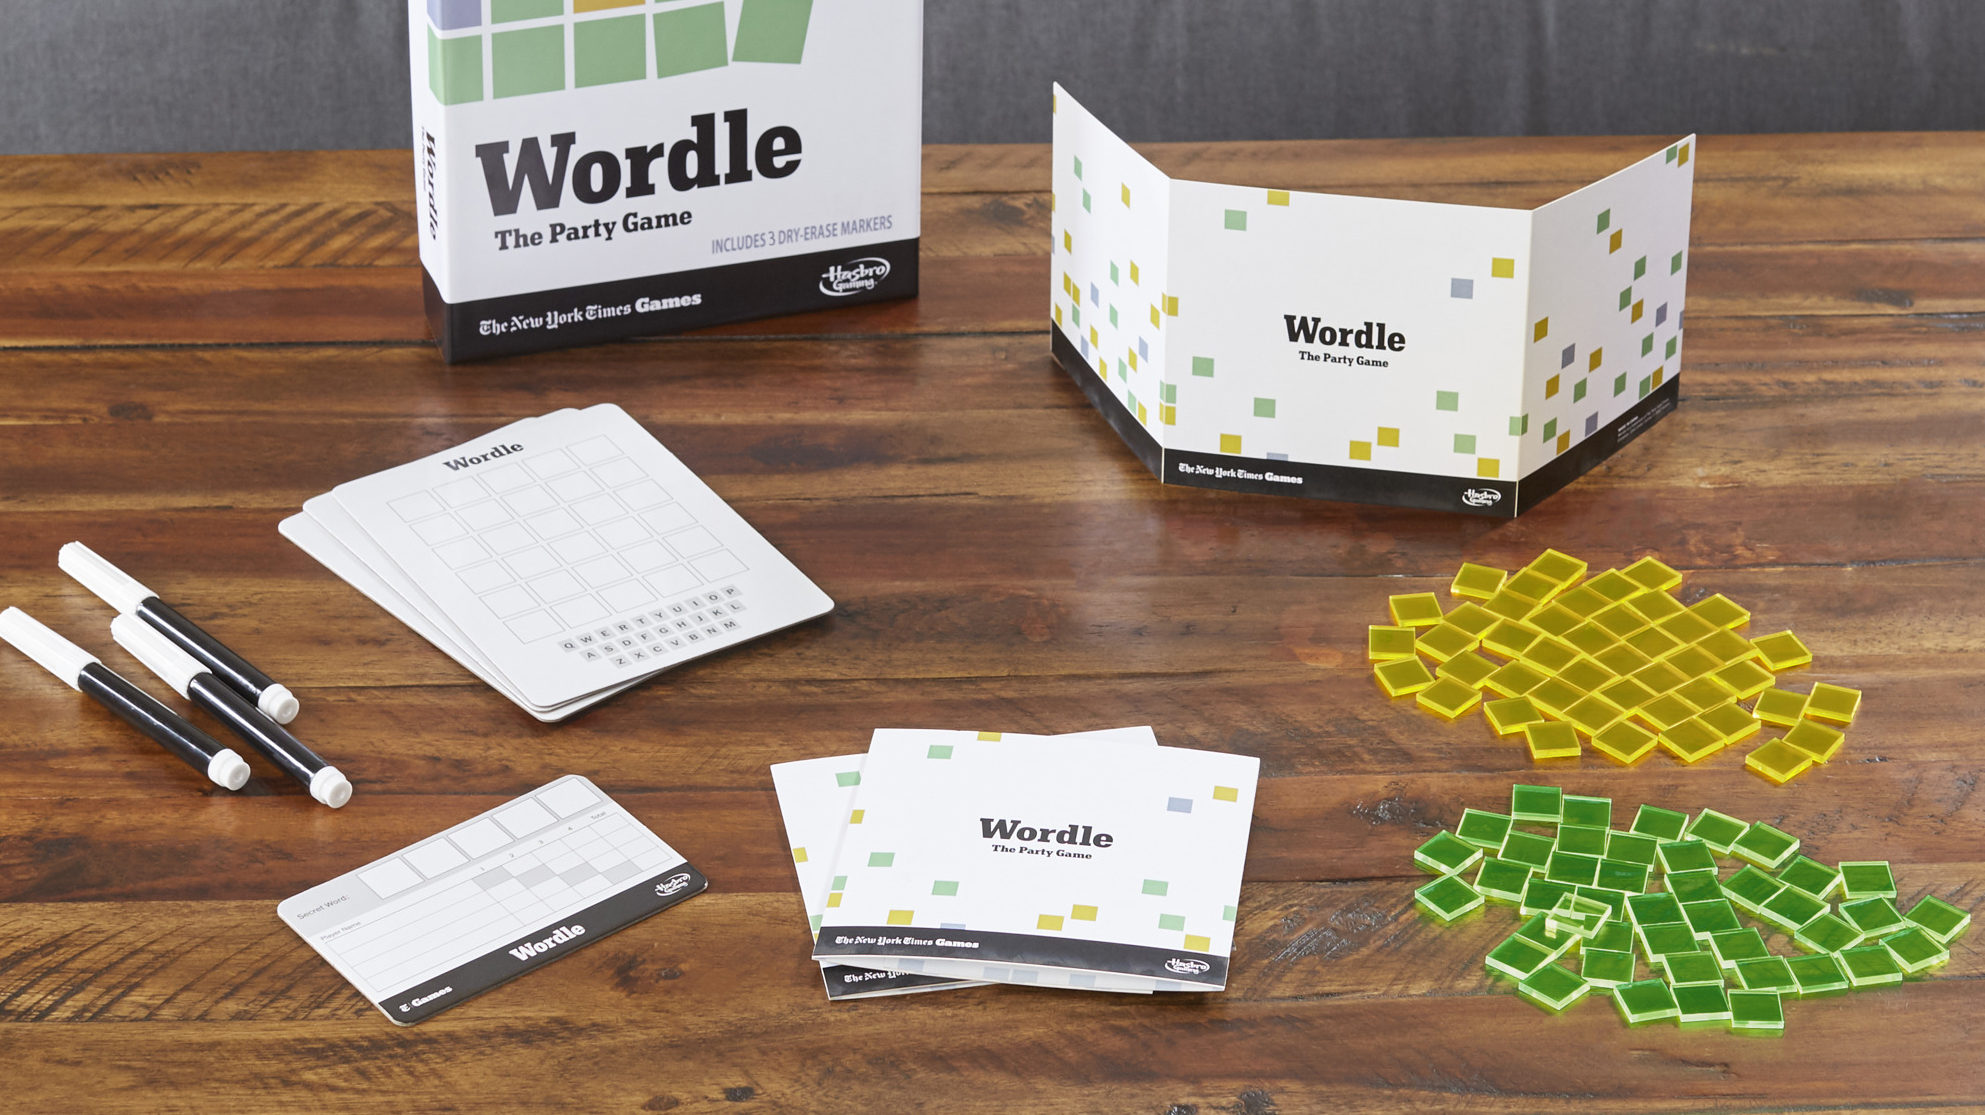 Wordle is being turned into a board game – here’s the inside scoop